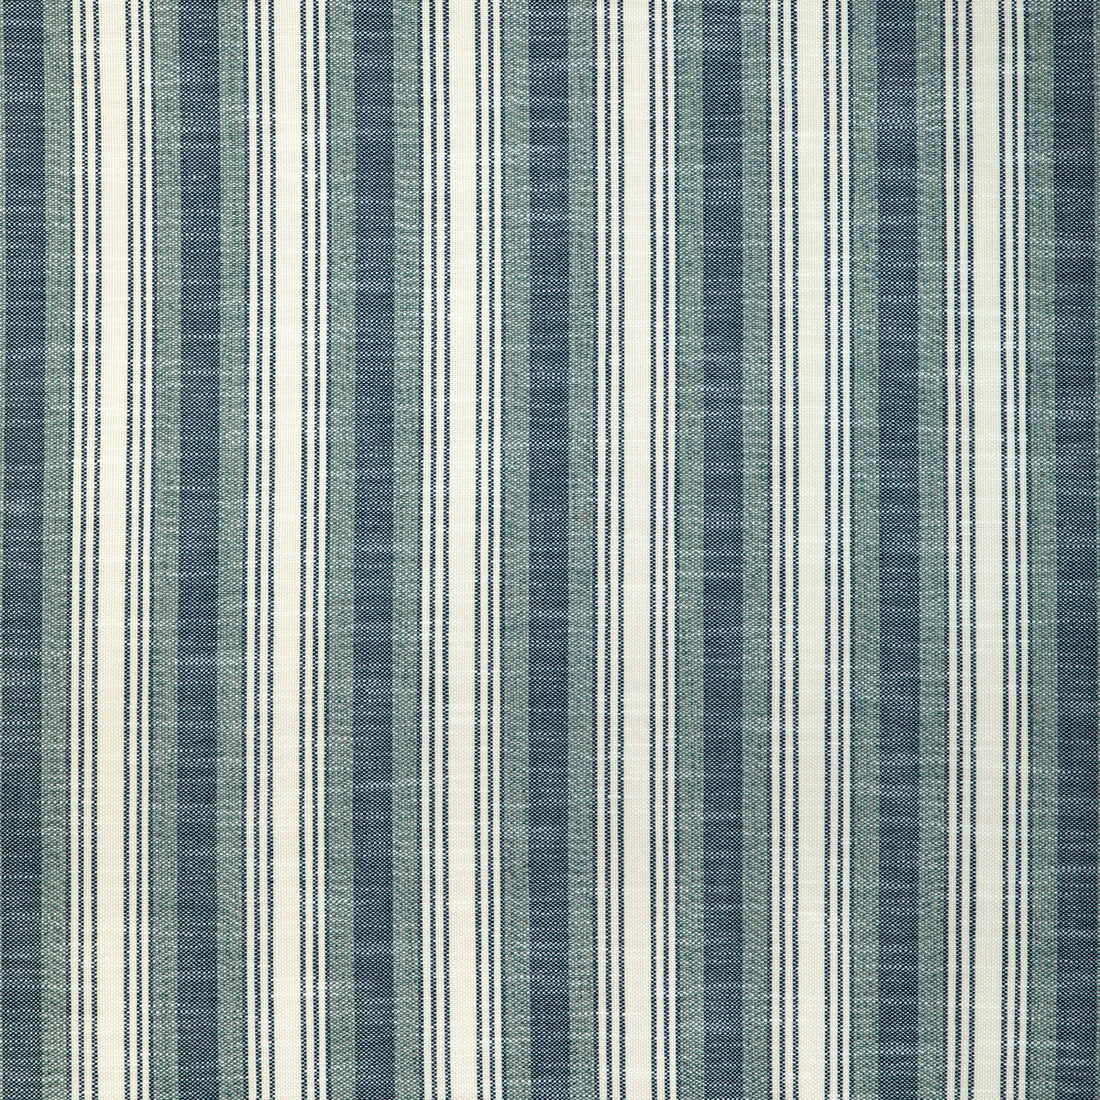 Sims Stripe fabric in marine color - pattern 37046.5.0 - by Kravet Design in the Thom Filicia Latitude collection